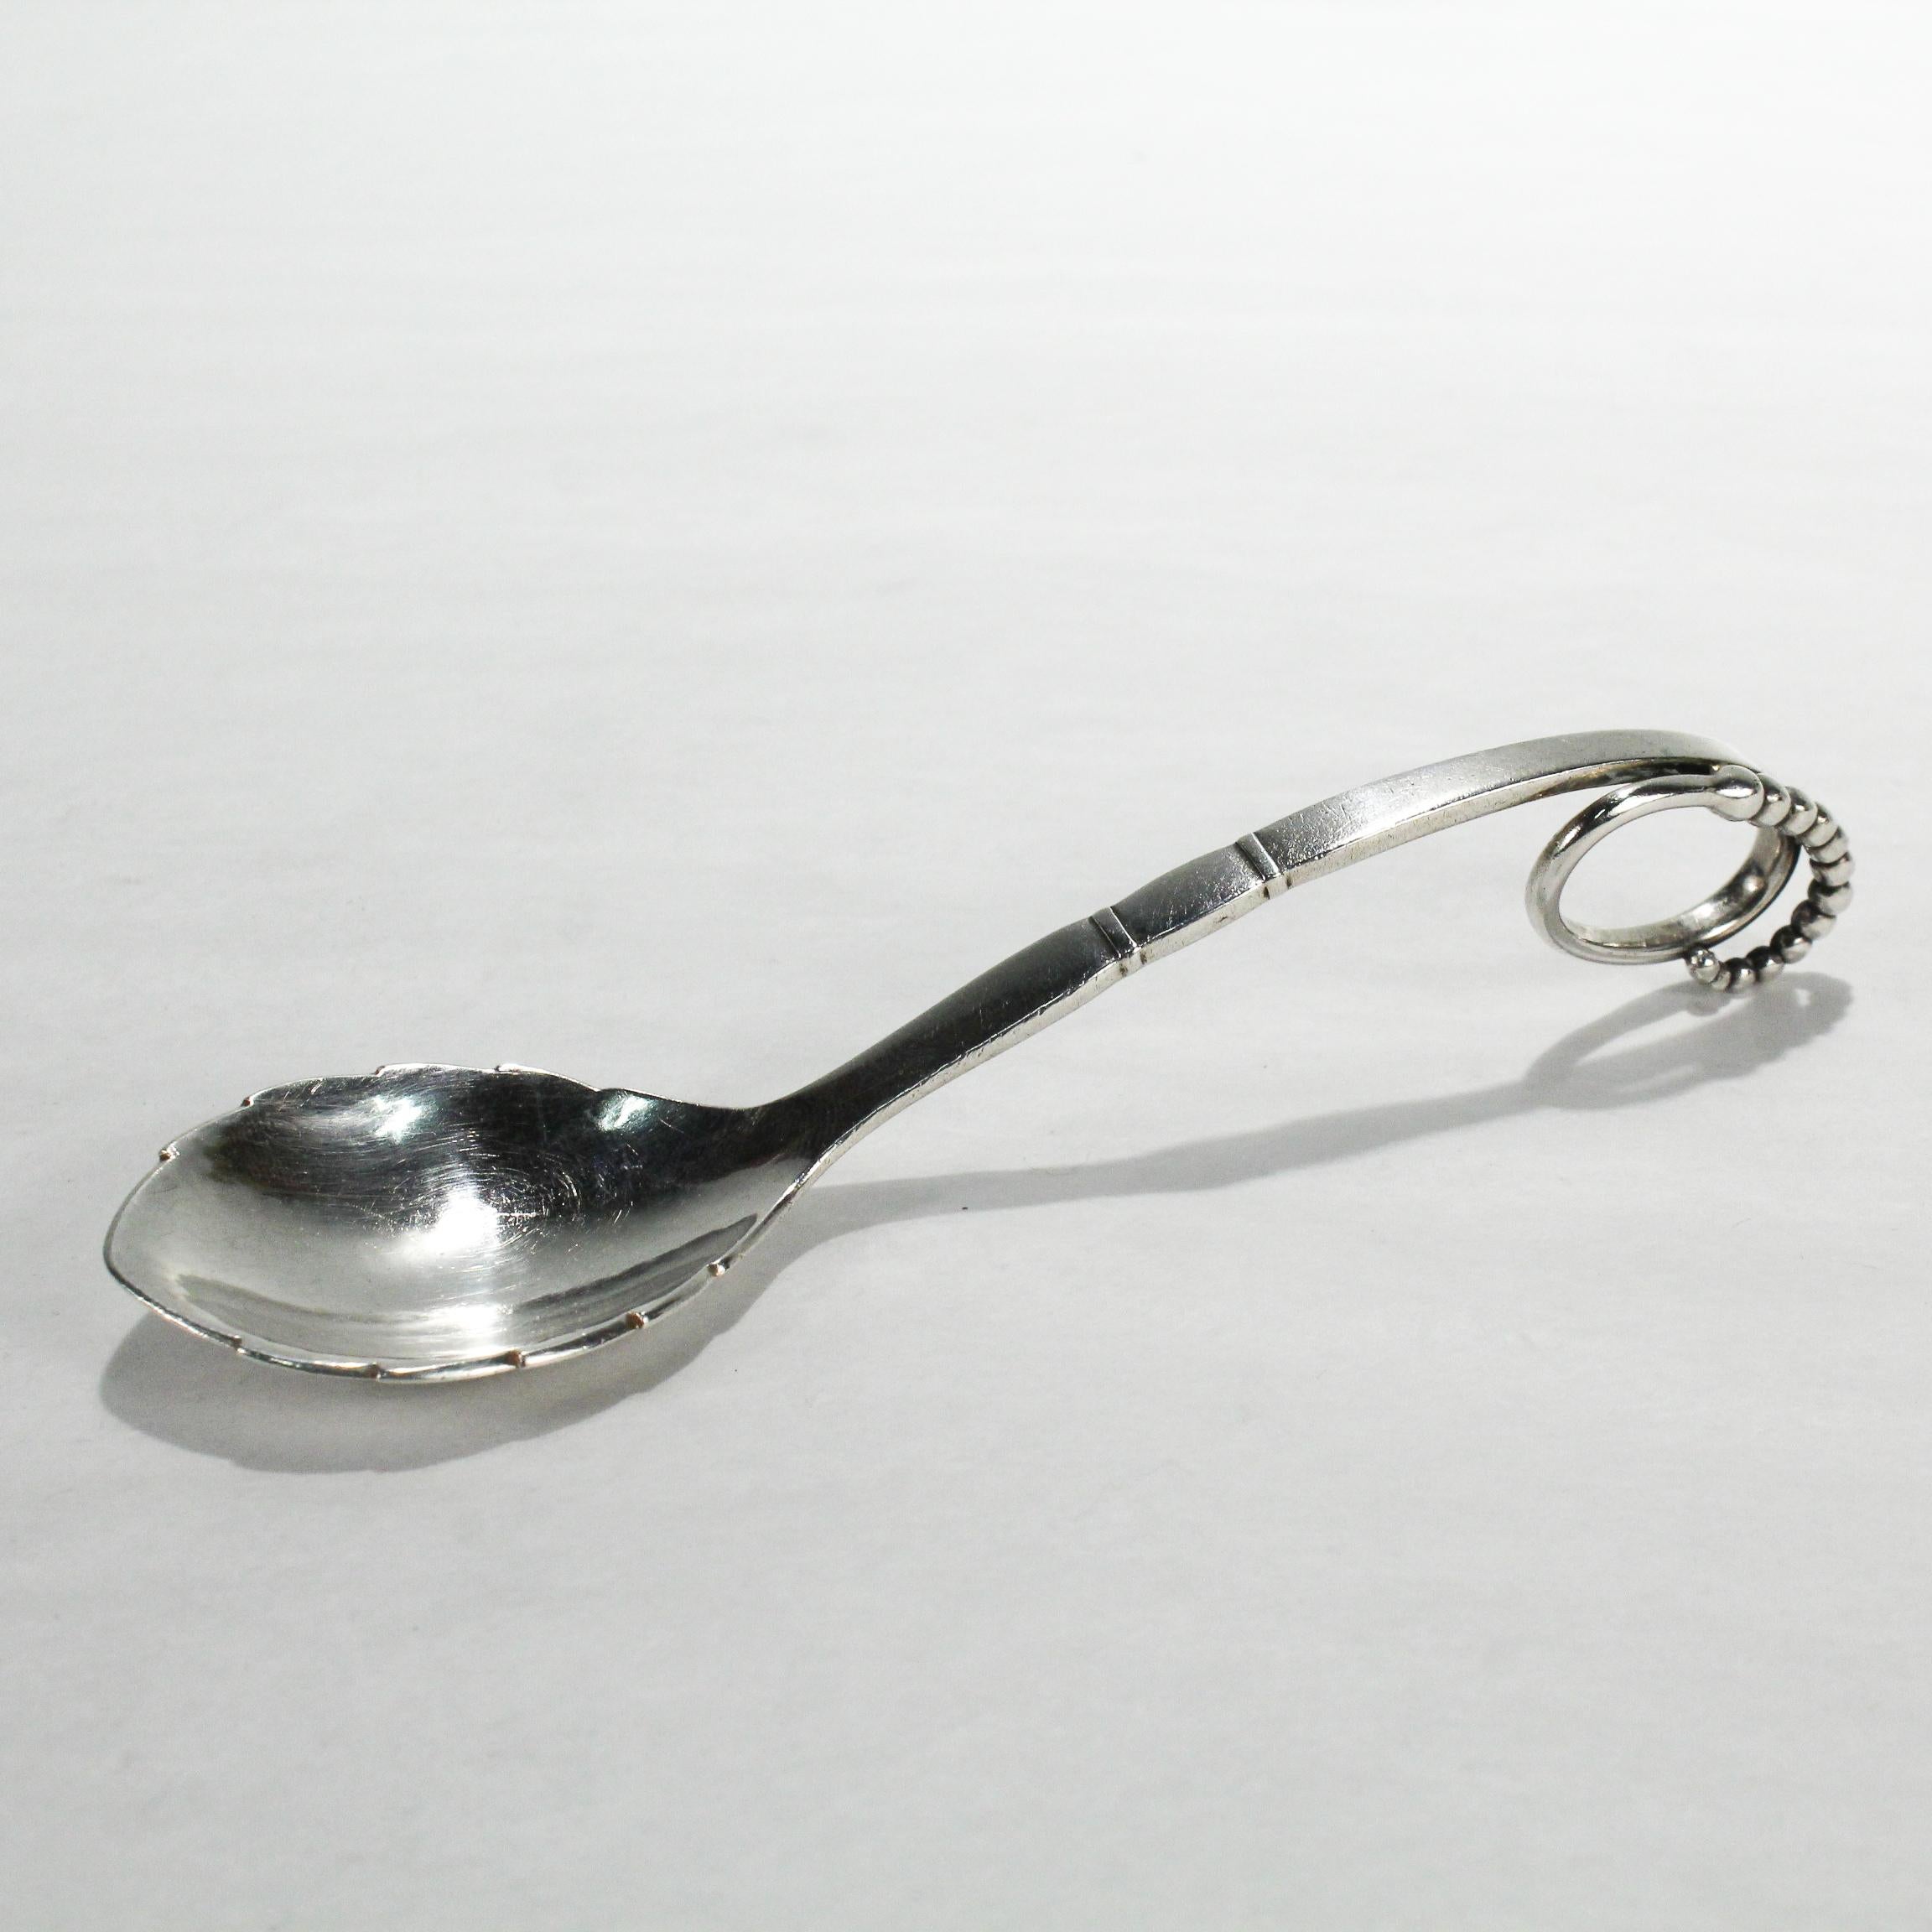 A fine vintage Georg Jensen sugar spoon.

In sterling silver.

Model no. Ornamental 41

Designed by Georg Jensen.

Simply a great sugar spoon! 

Date:
1933-1944

Overall Condition:
It is in overall good, as-pictured, used estate